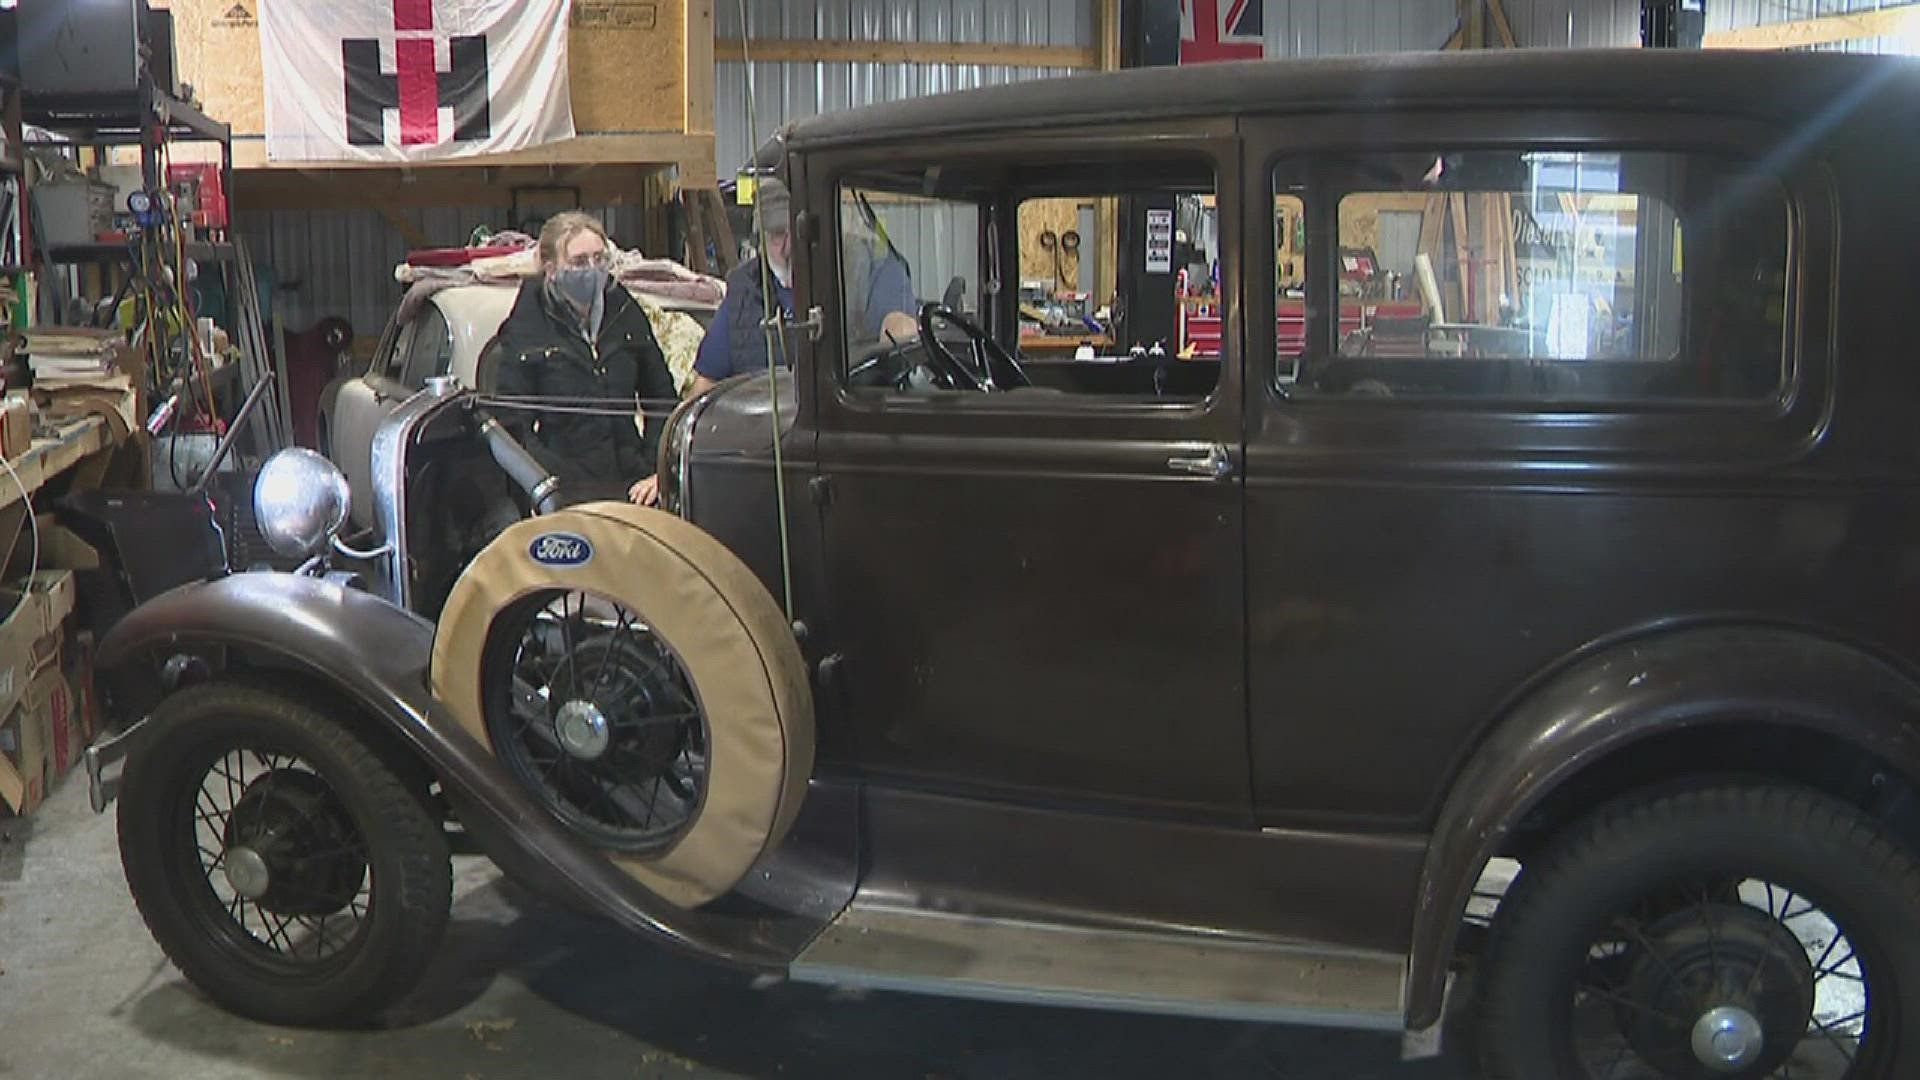 Originally bought as a rural mail-car, the old vehicle has spent nearly a century in DeWitt, IA... until this fall, when a new owner was captivated by its history.